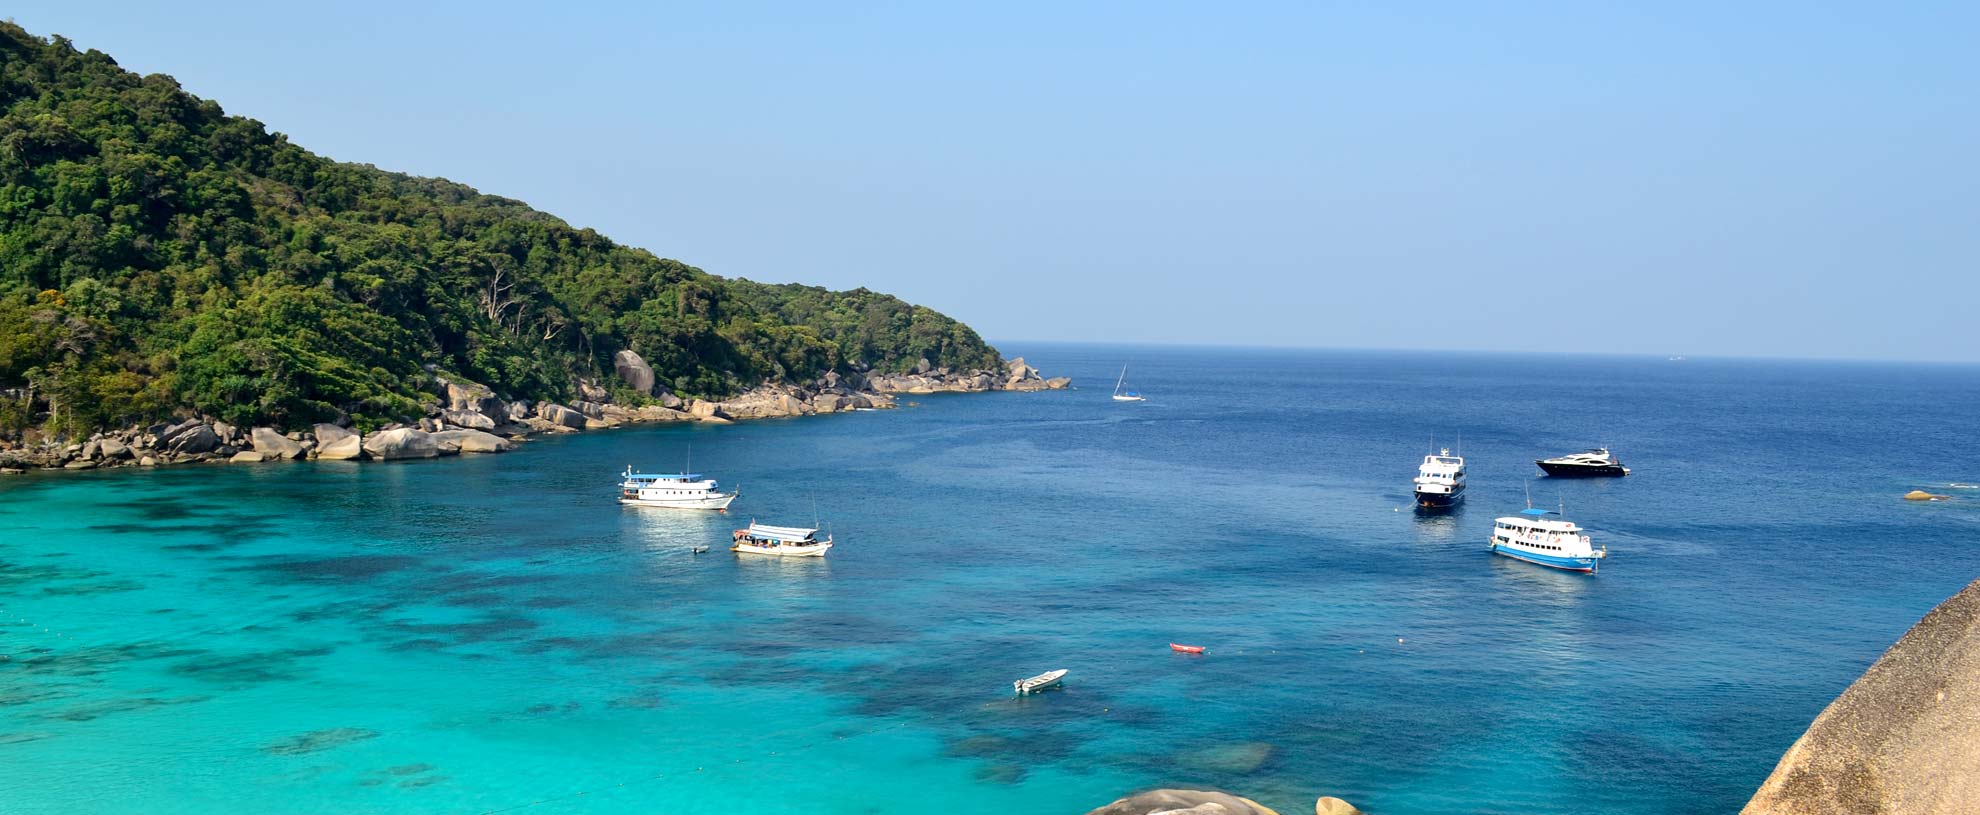 Similan Island liveaboards anchored in Donald Duck Bay